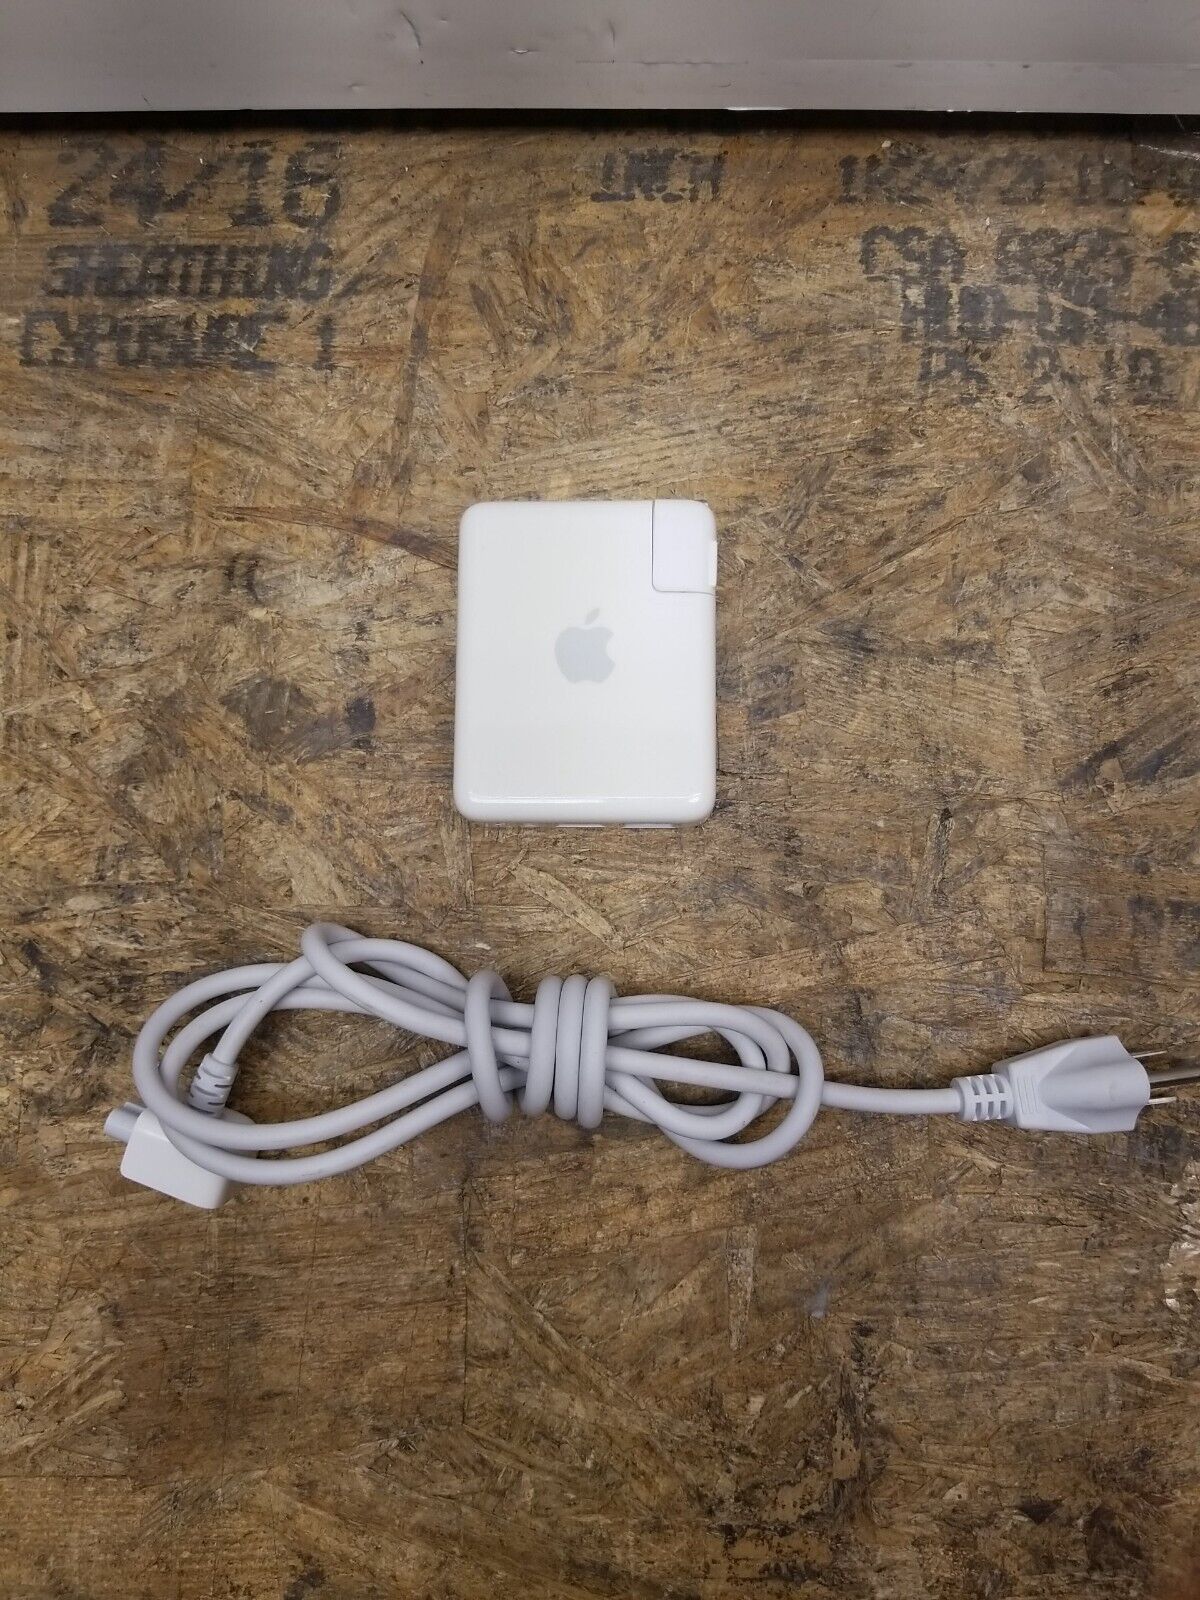 Apple A1264 Airport Express Wireless WiFi Base Station w/ Power Cord *TESTED*